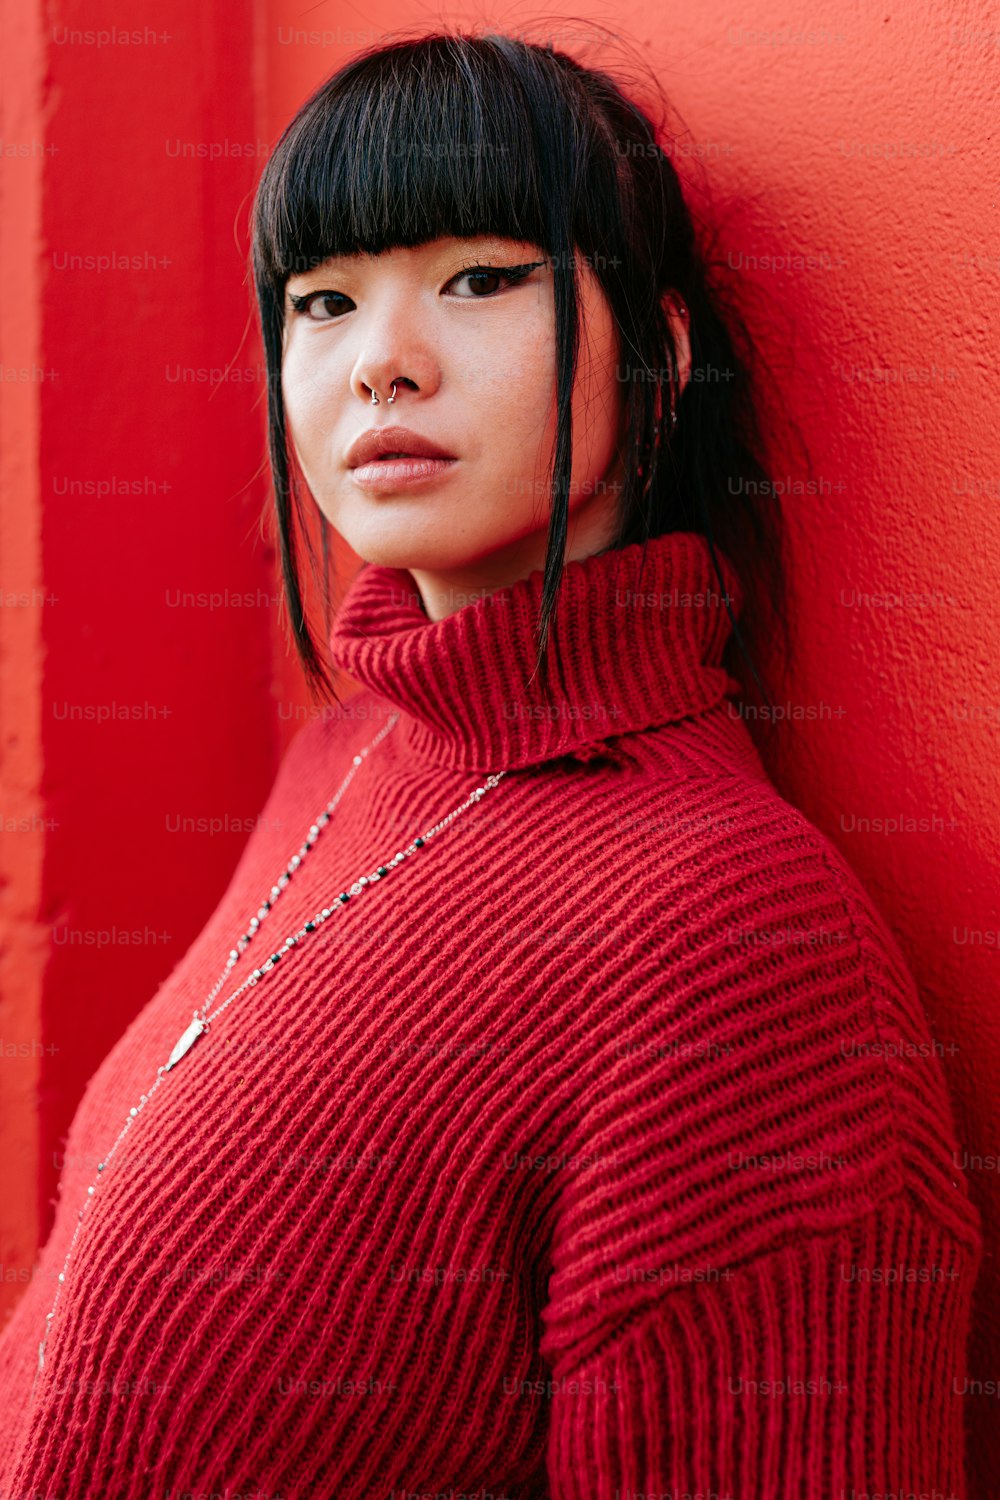 a woman in a red sweater leaning against a red wall